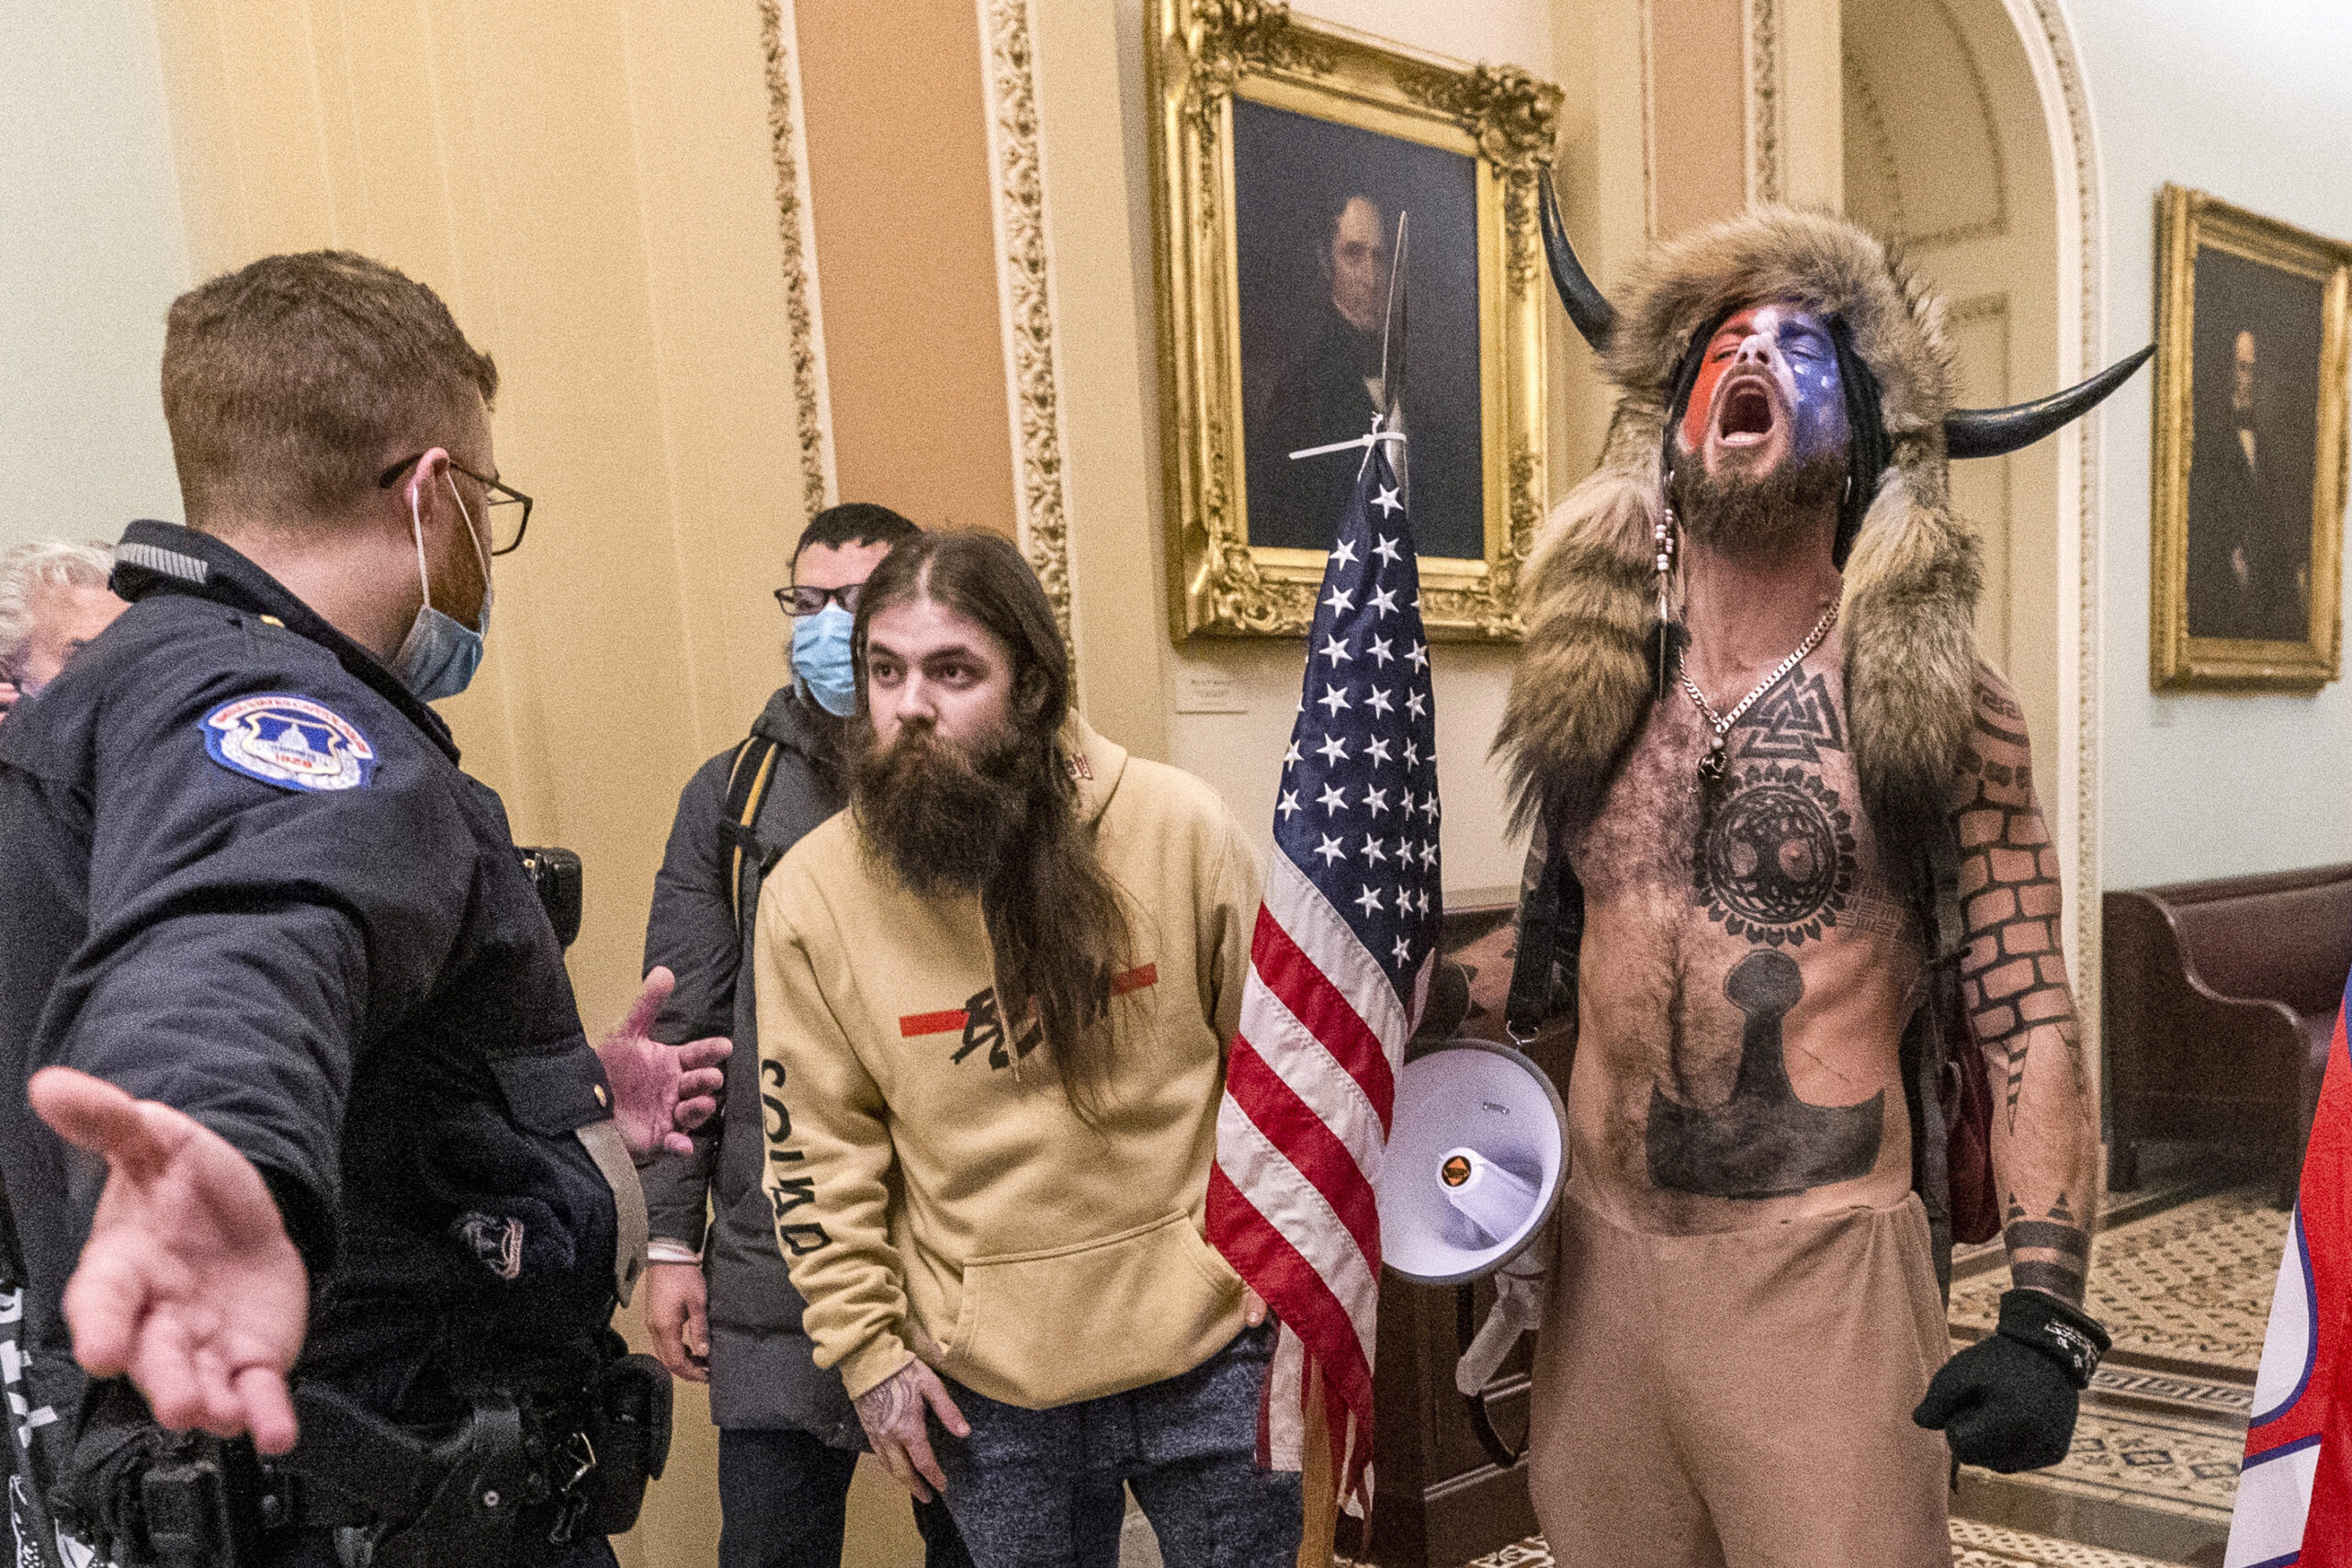 FILE - Supporters of President Donald Trump, including Jacob Chansley, right with fur hat, are confronted by U.S. Capitol Police officers outside the Senate chamber inside the Capitol during the capitol riot in Washington, Jan. 6, 2021. Chansley was sentenced on Wednesday, Nov. 17, 2021, to 41 months in prison for his felony conviction for obstructing an official proceeding. Though he wasn't accused of violence, Chansley acknowledged he was among the first 30 rioters in the building, offered thanks while in the Senate for having the chance to get rid of traitors and wrote a threatening note to Vice President Mike Pence. (AP Photo/Manuel Balce Ceneta, File)